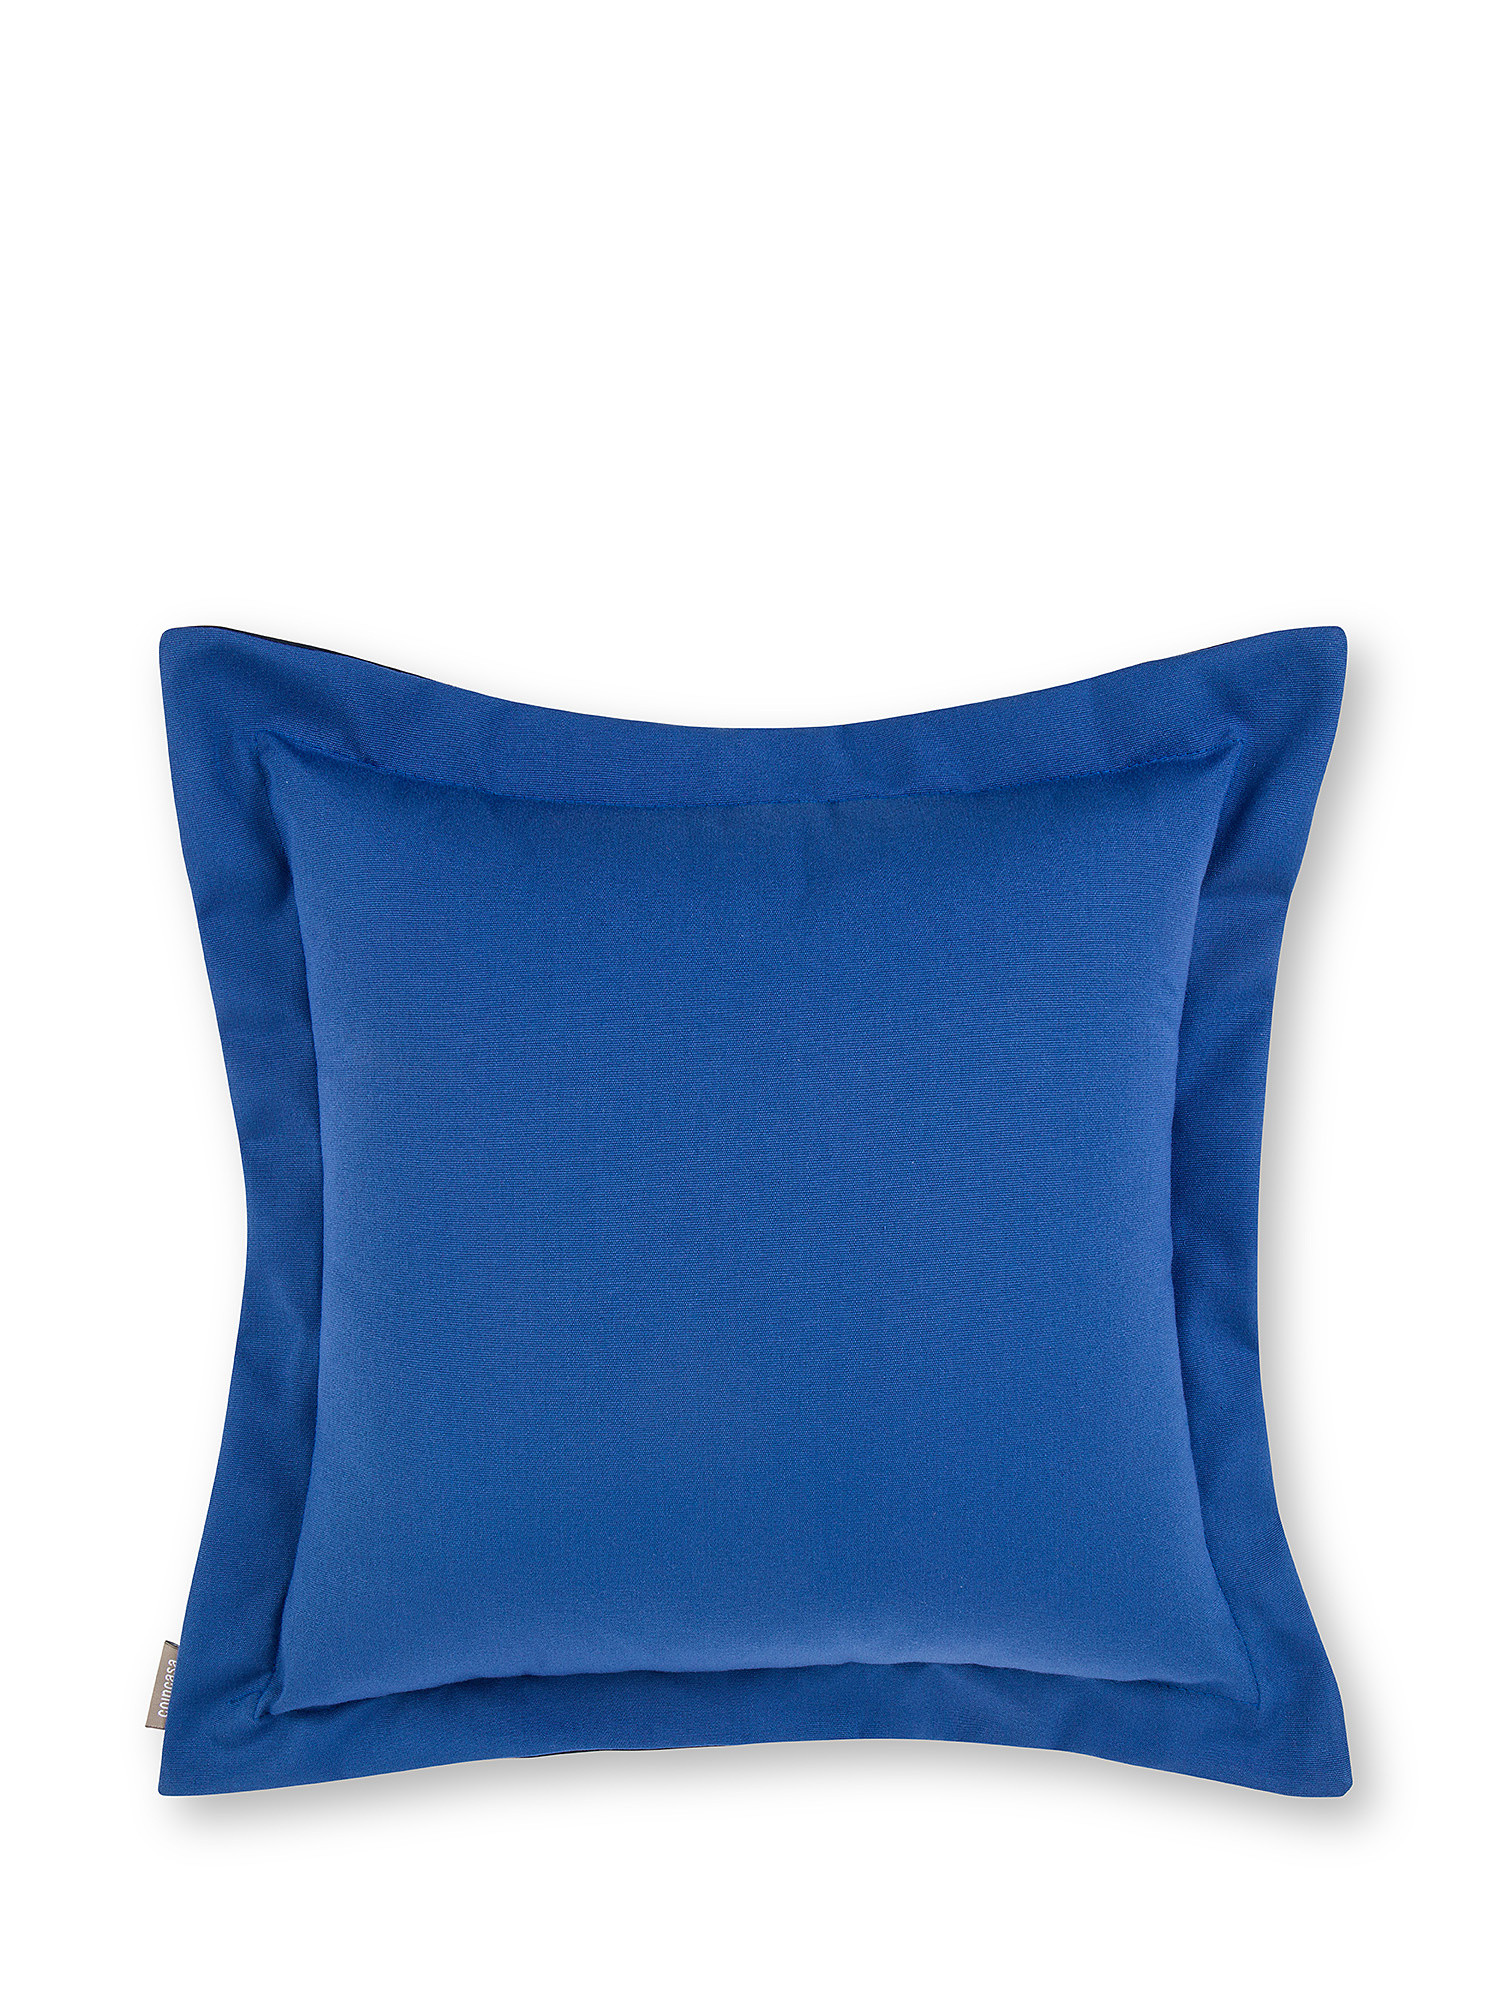 Outdoor cushion in double color fabric 45x45cm, Blue, large image number 0